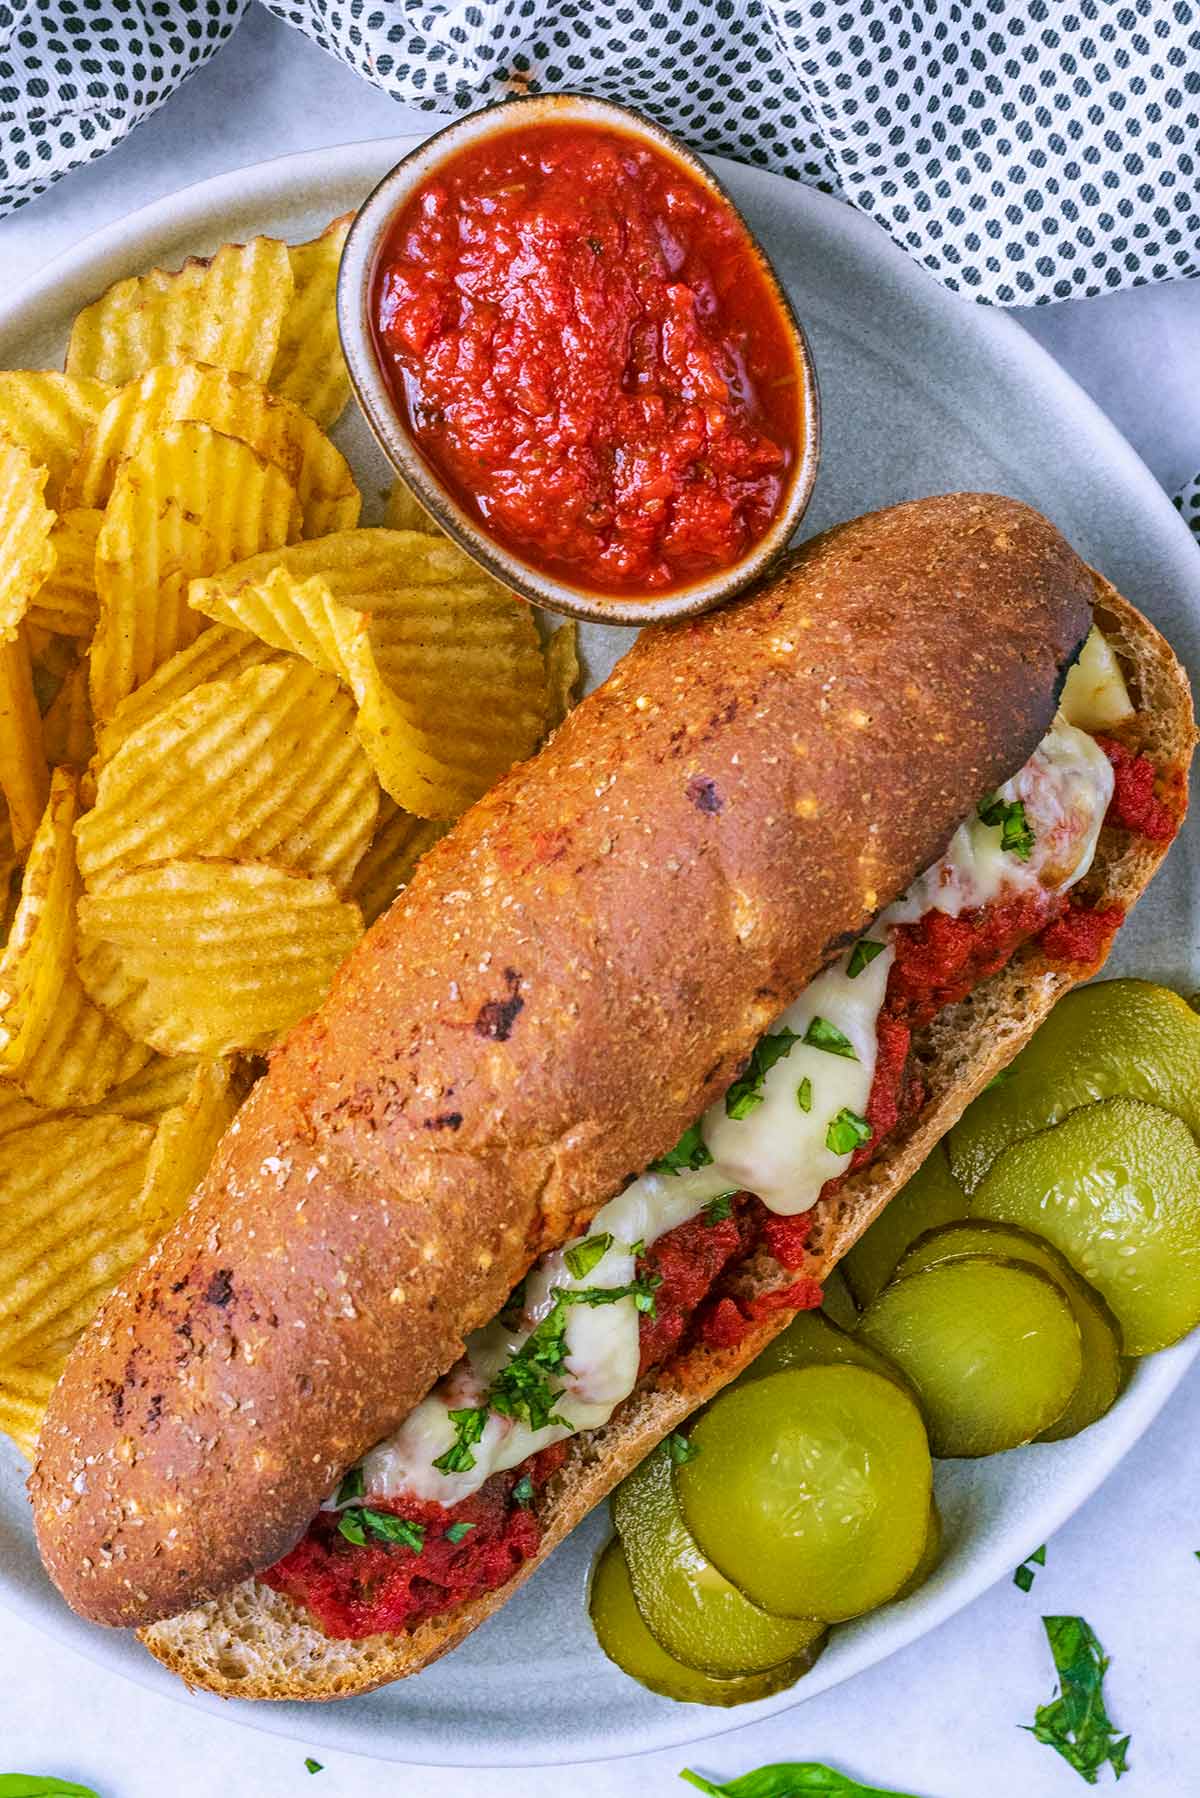 A meatball sub on a plate with crisps, pickles and a small bowl of marinara.